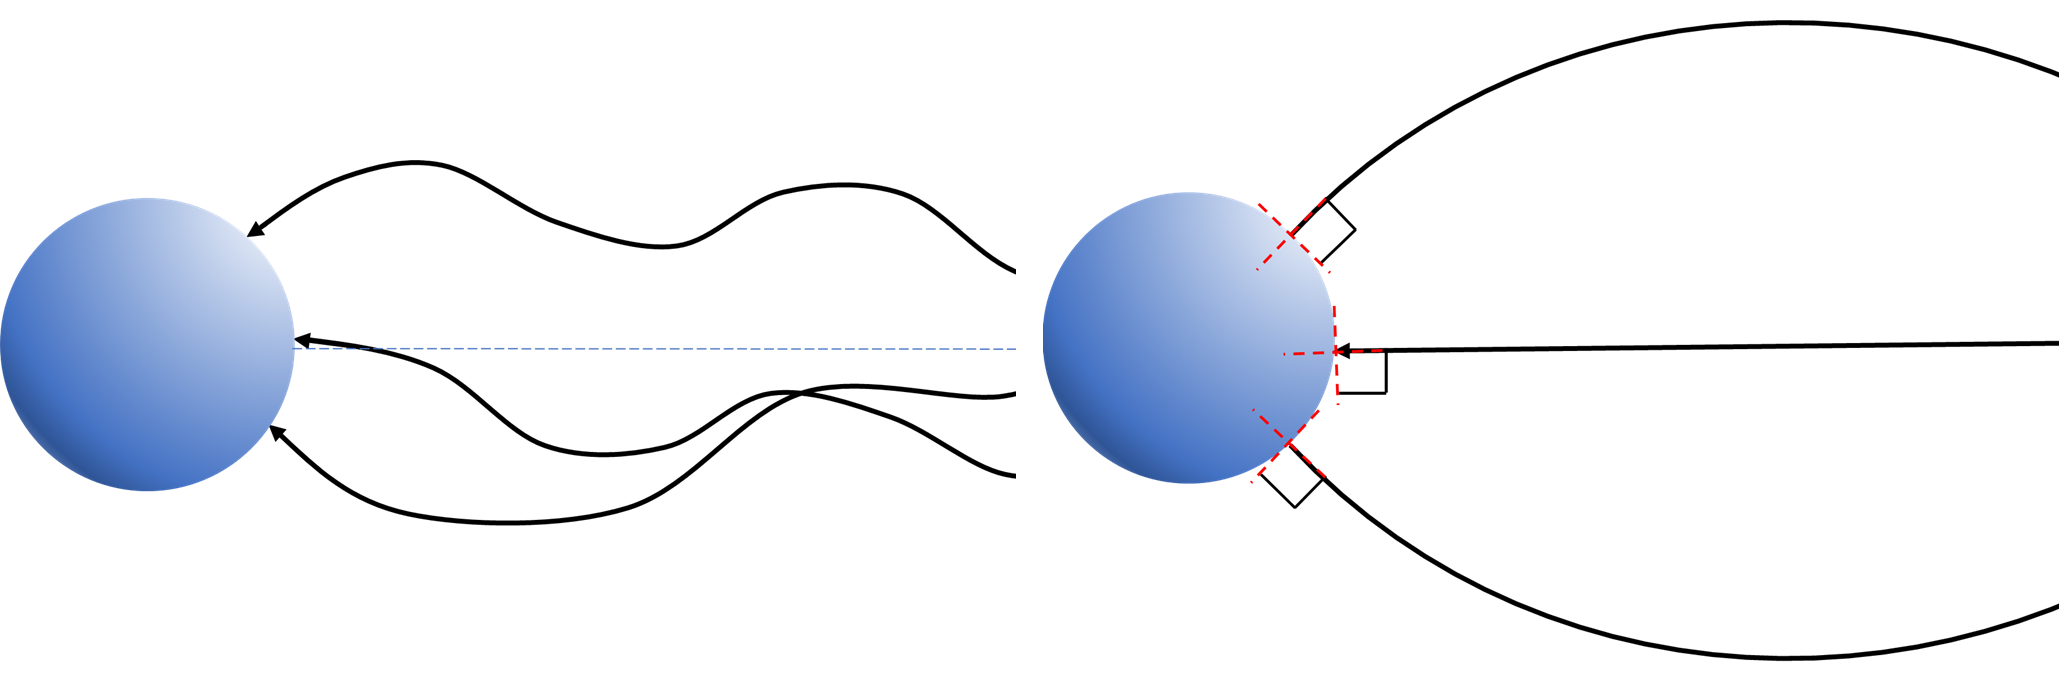 Diagram showing bent and random-path rays of light hitting the earth.